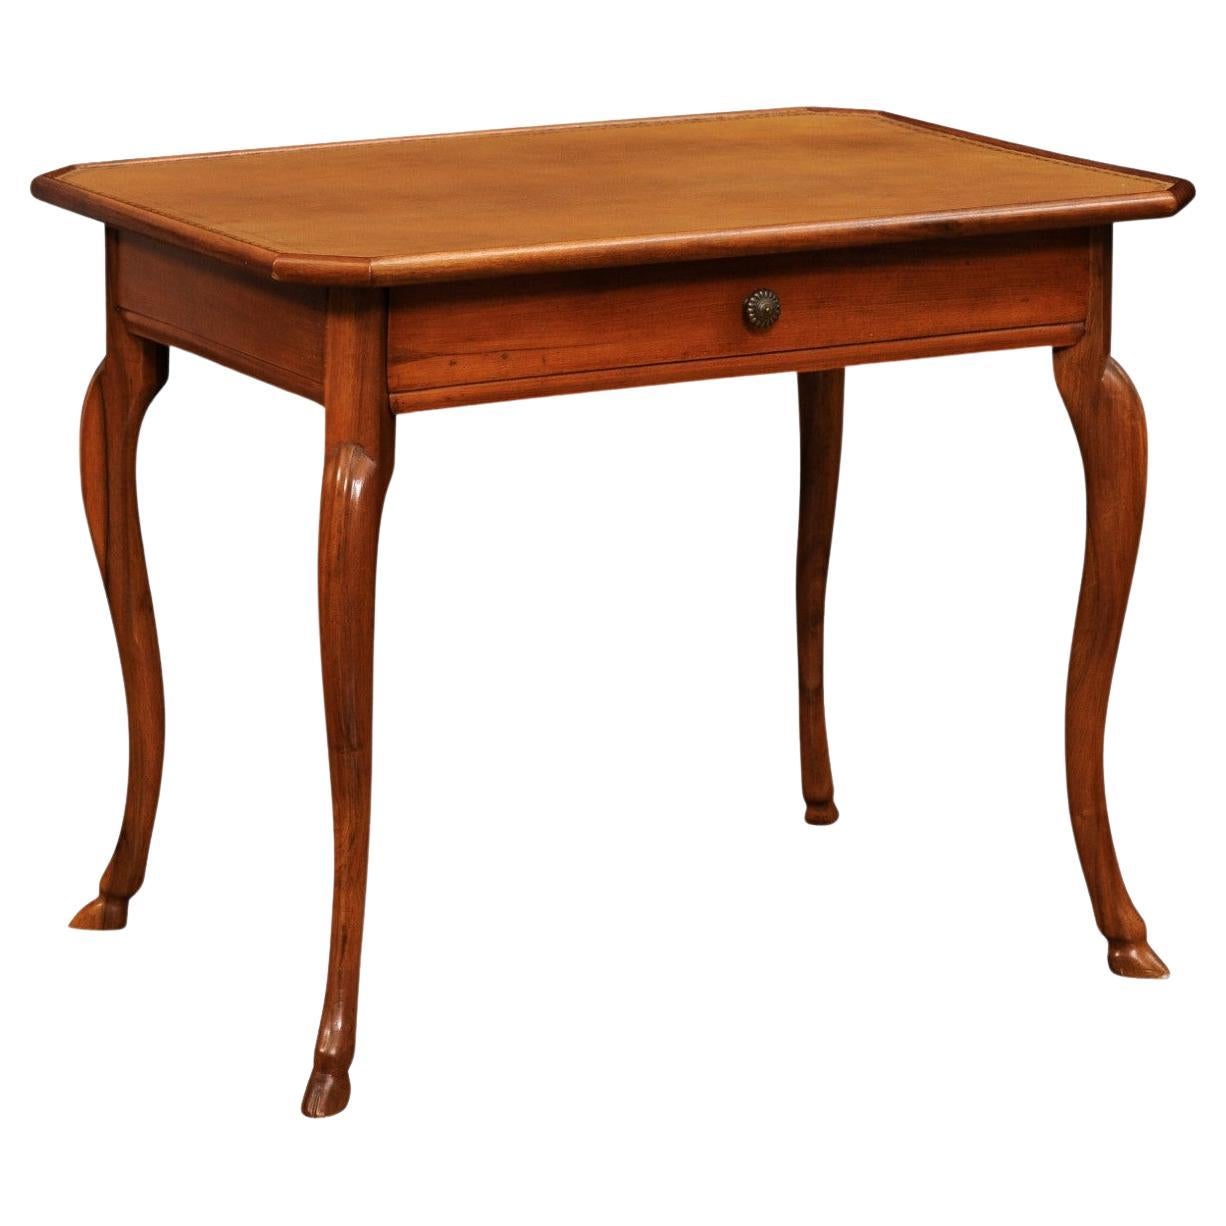 French Louis XV Period 1750s Walnut Desk with Leather Top and Cabriole Legs